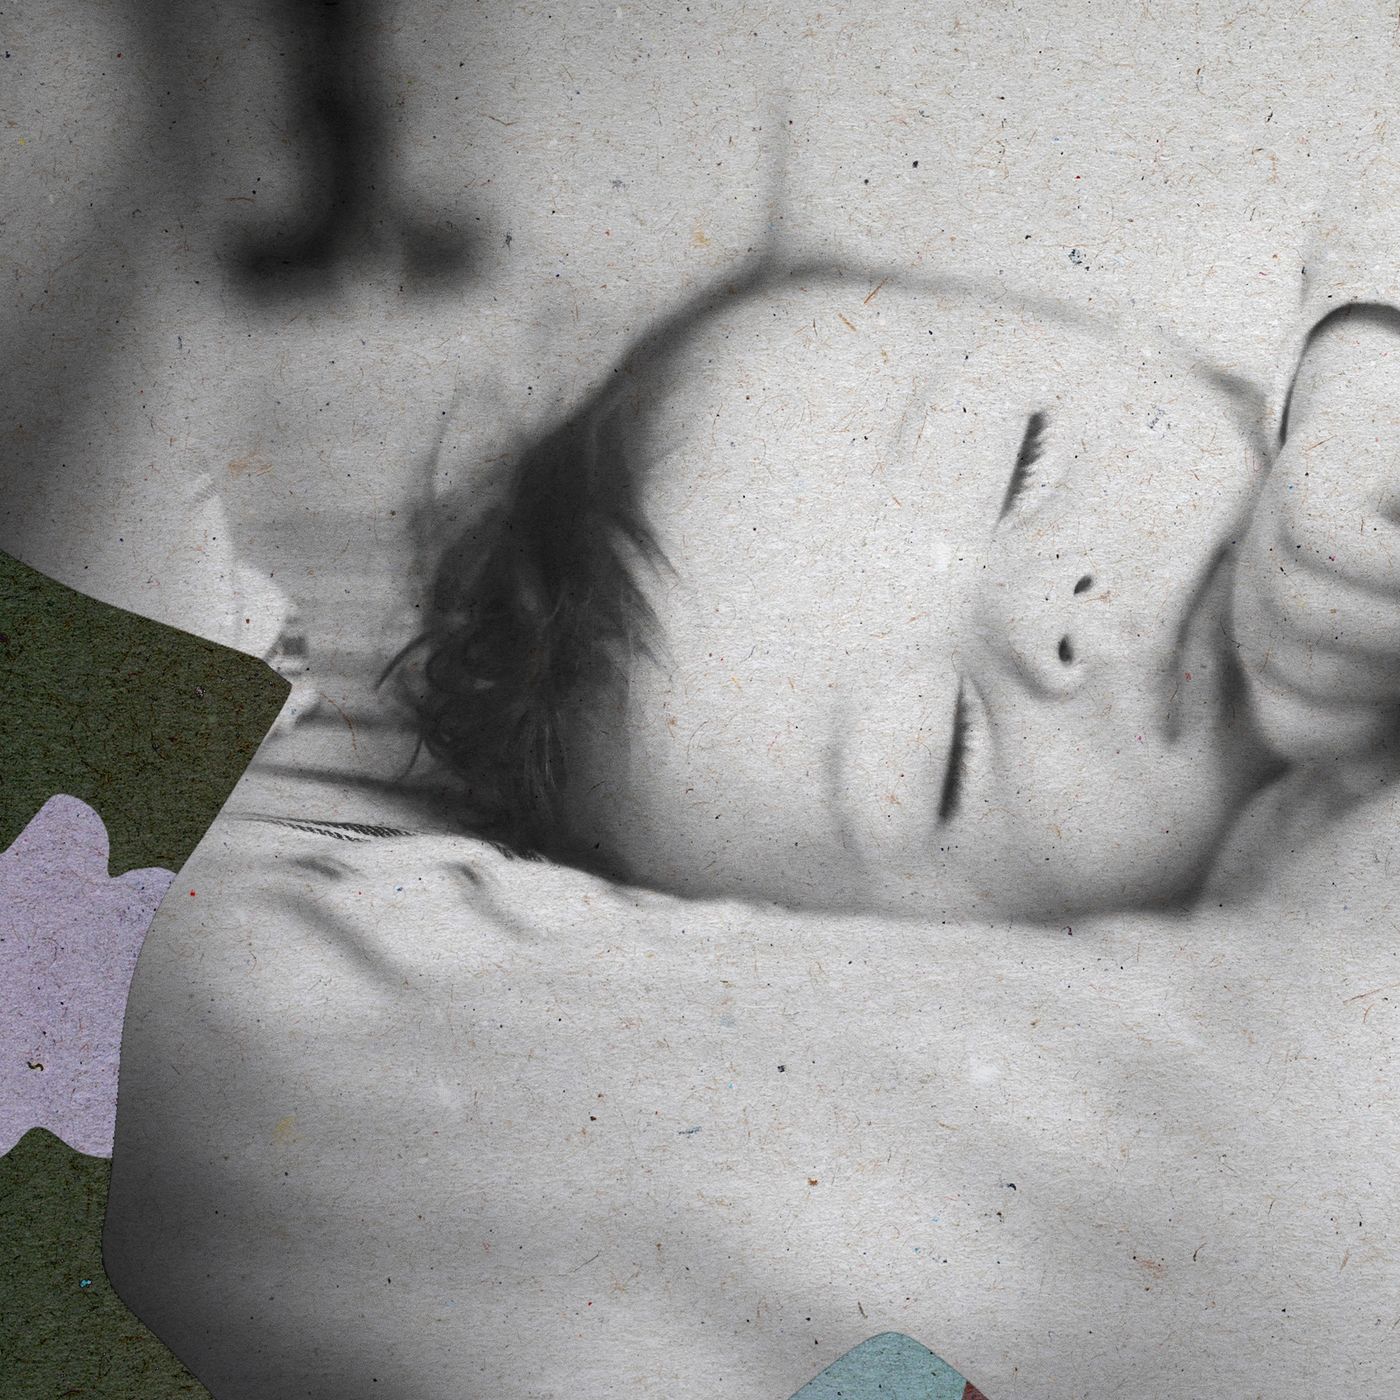 Co-sleeping Pro, Cons, and Controversy